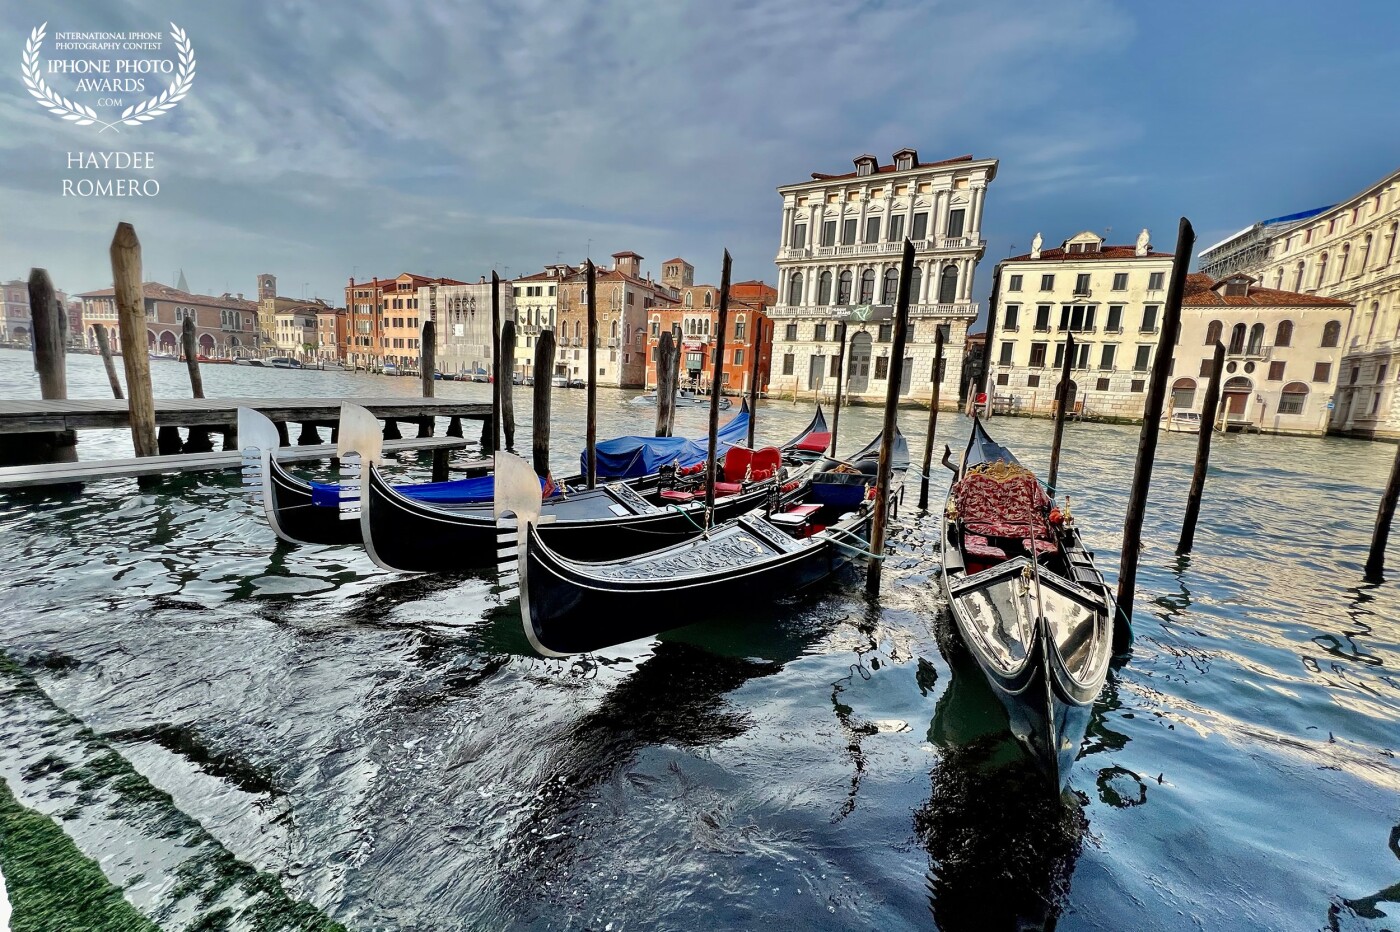 A gondola is a traditional narrow and long Venetian rowing boat. Although gondolas were the main means of transport in Venice centuries ago, today it carries tourists from one point of the city to the other.